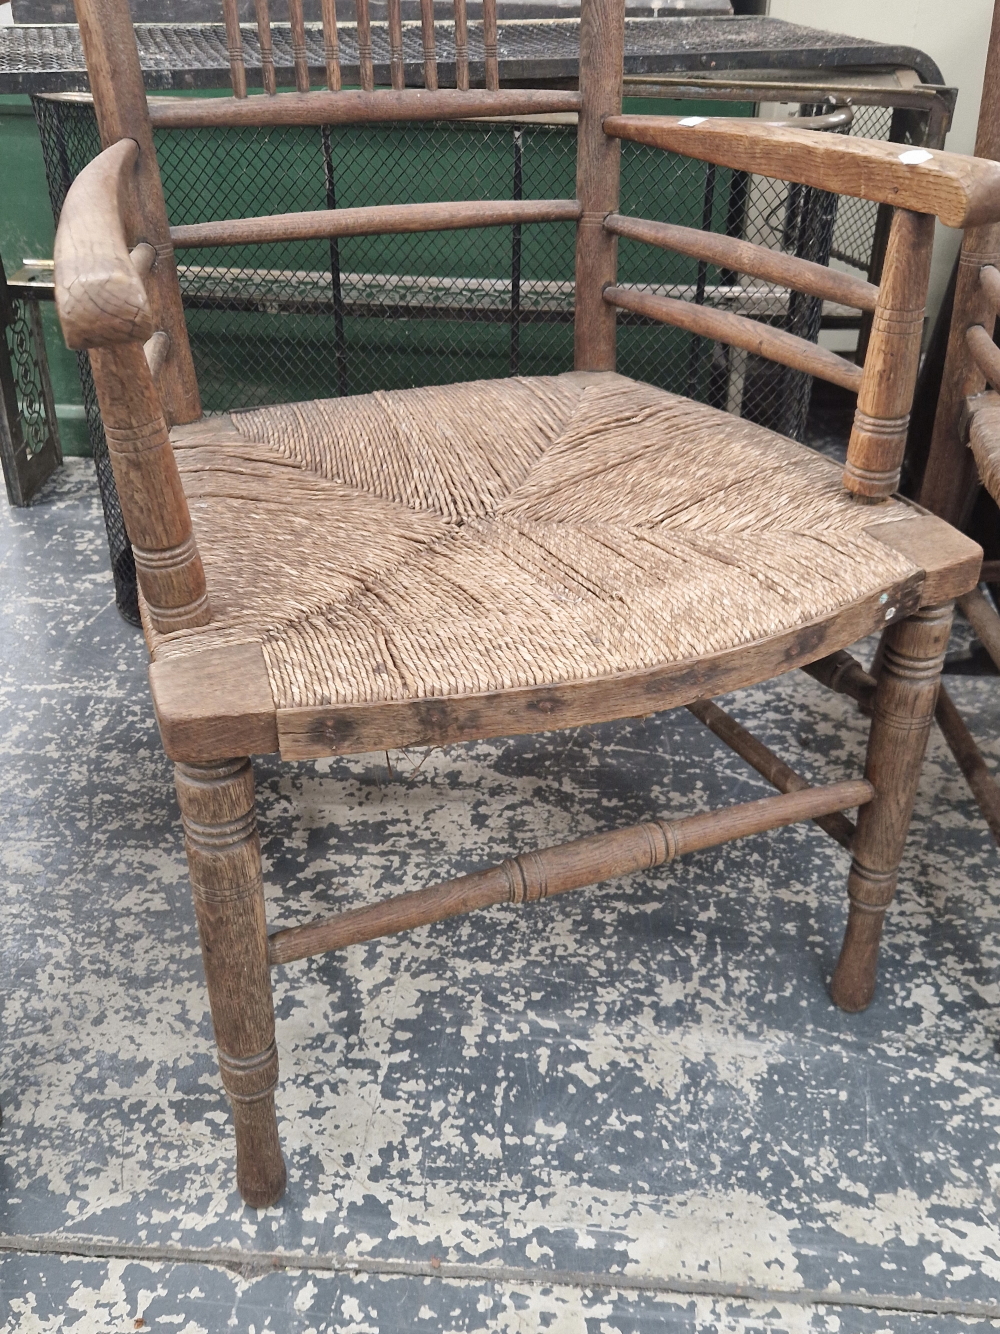 TWO WILLIAM MORRIS STYLE OAK ELBOW CHAIRS WITH RUSH SEATS - Image 2 of 3